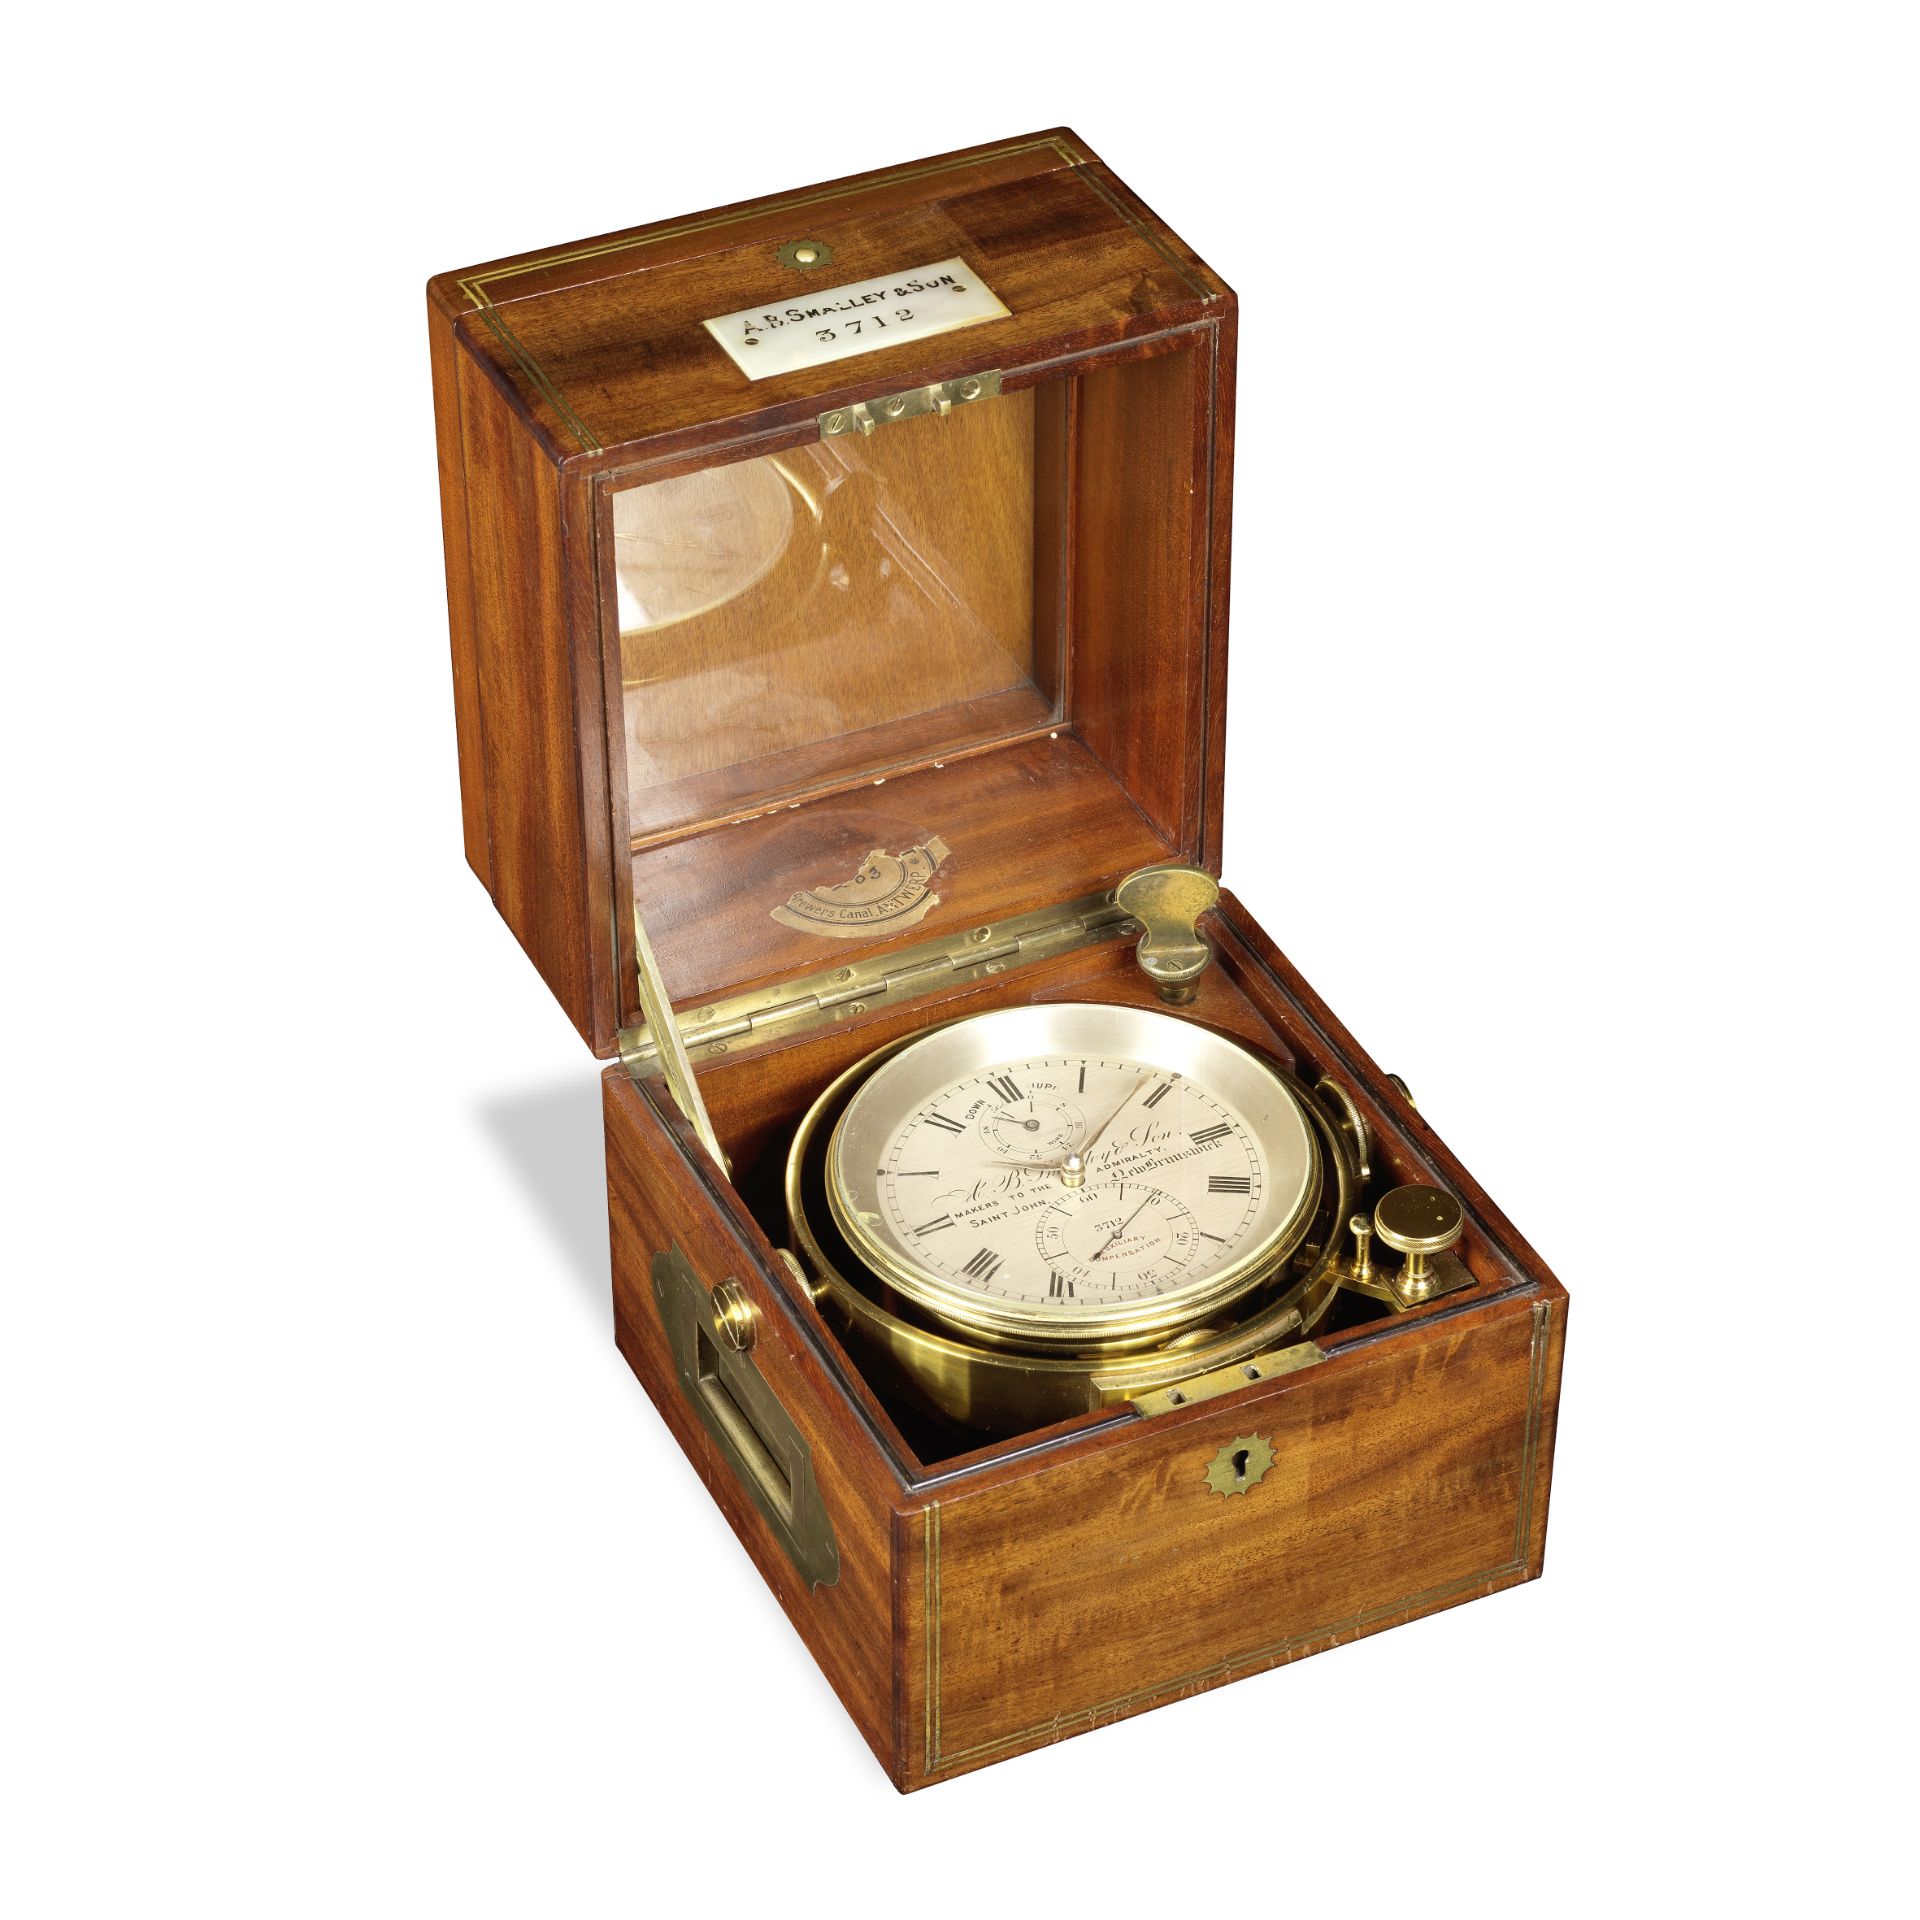 A rare mid-19th century Canadian brass-strung mahogany two-day marine chronometer with Lund-type...